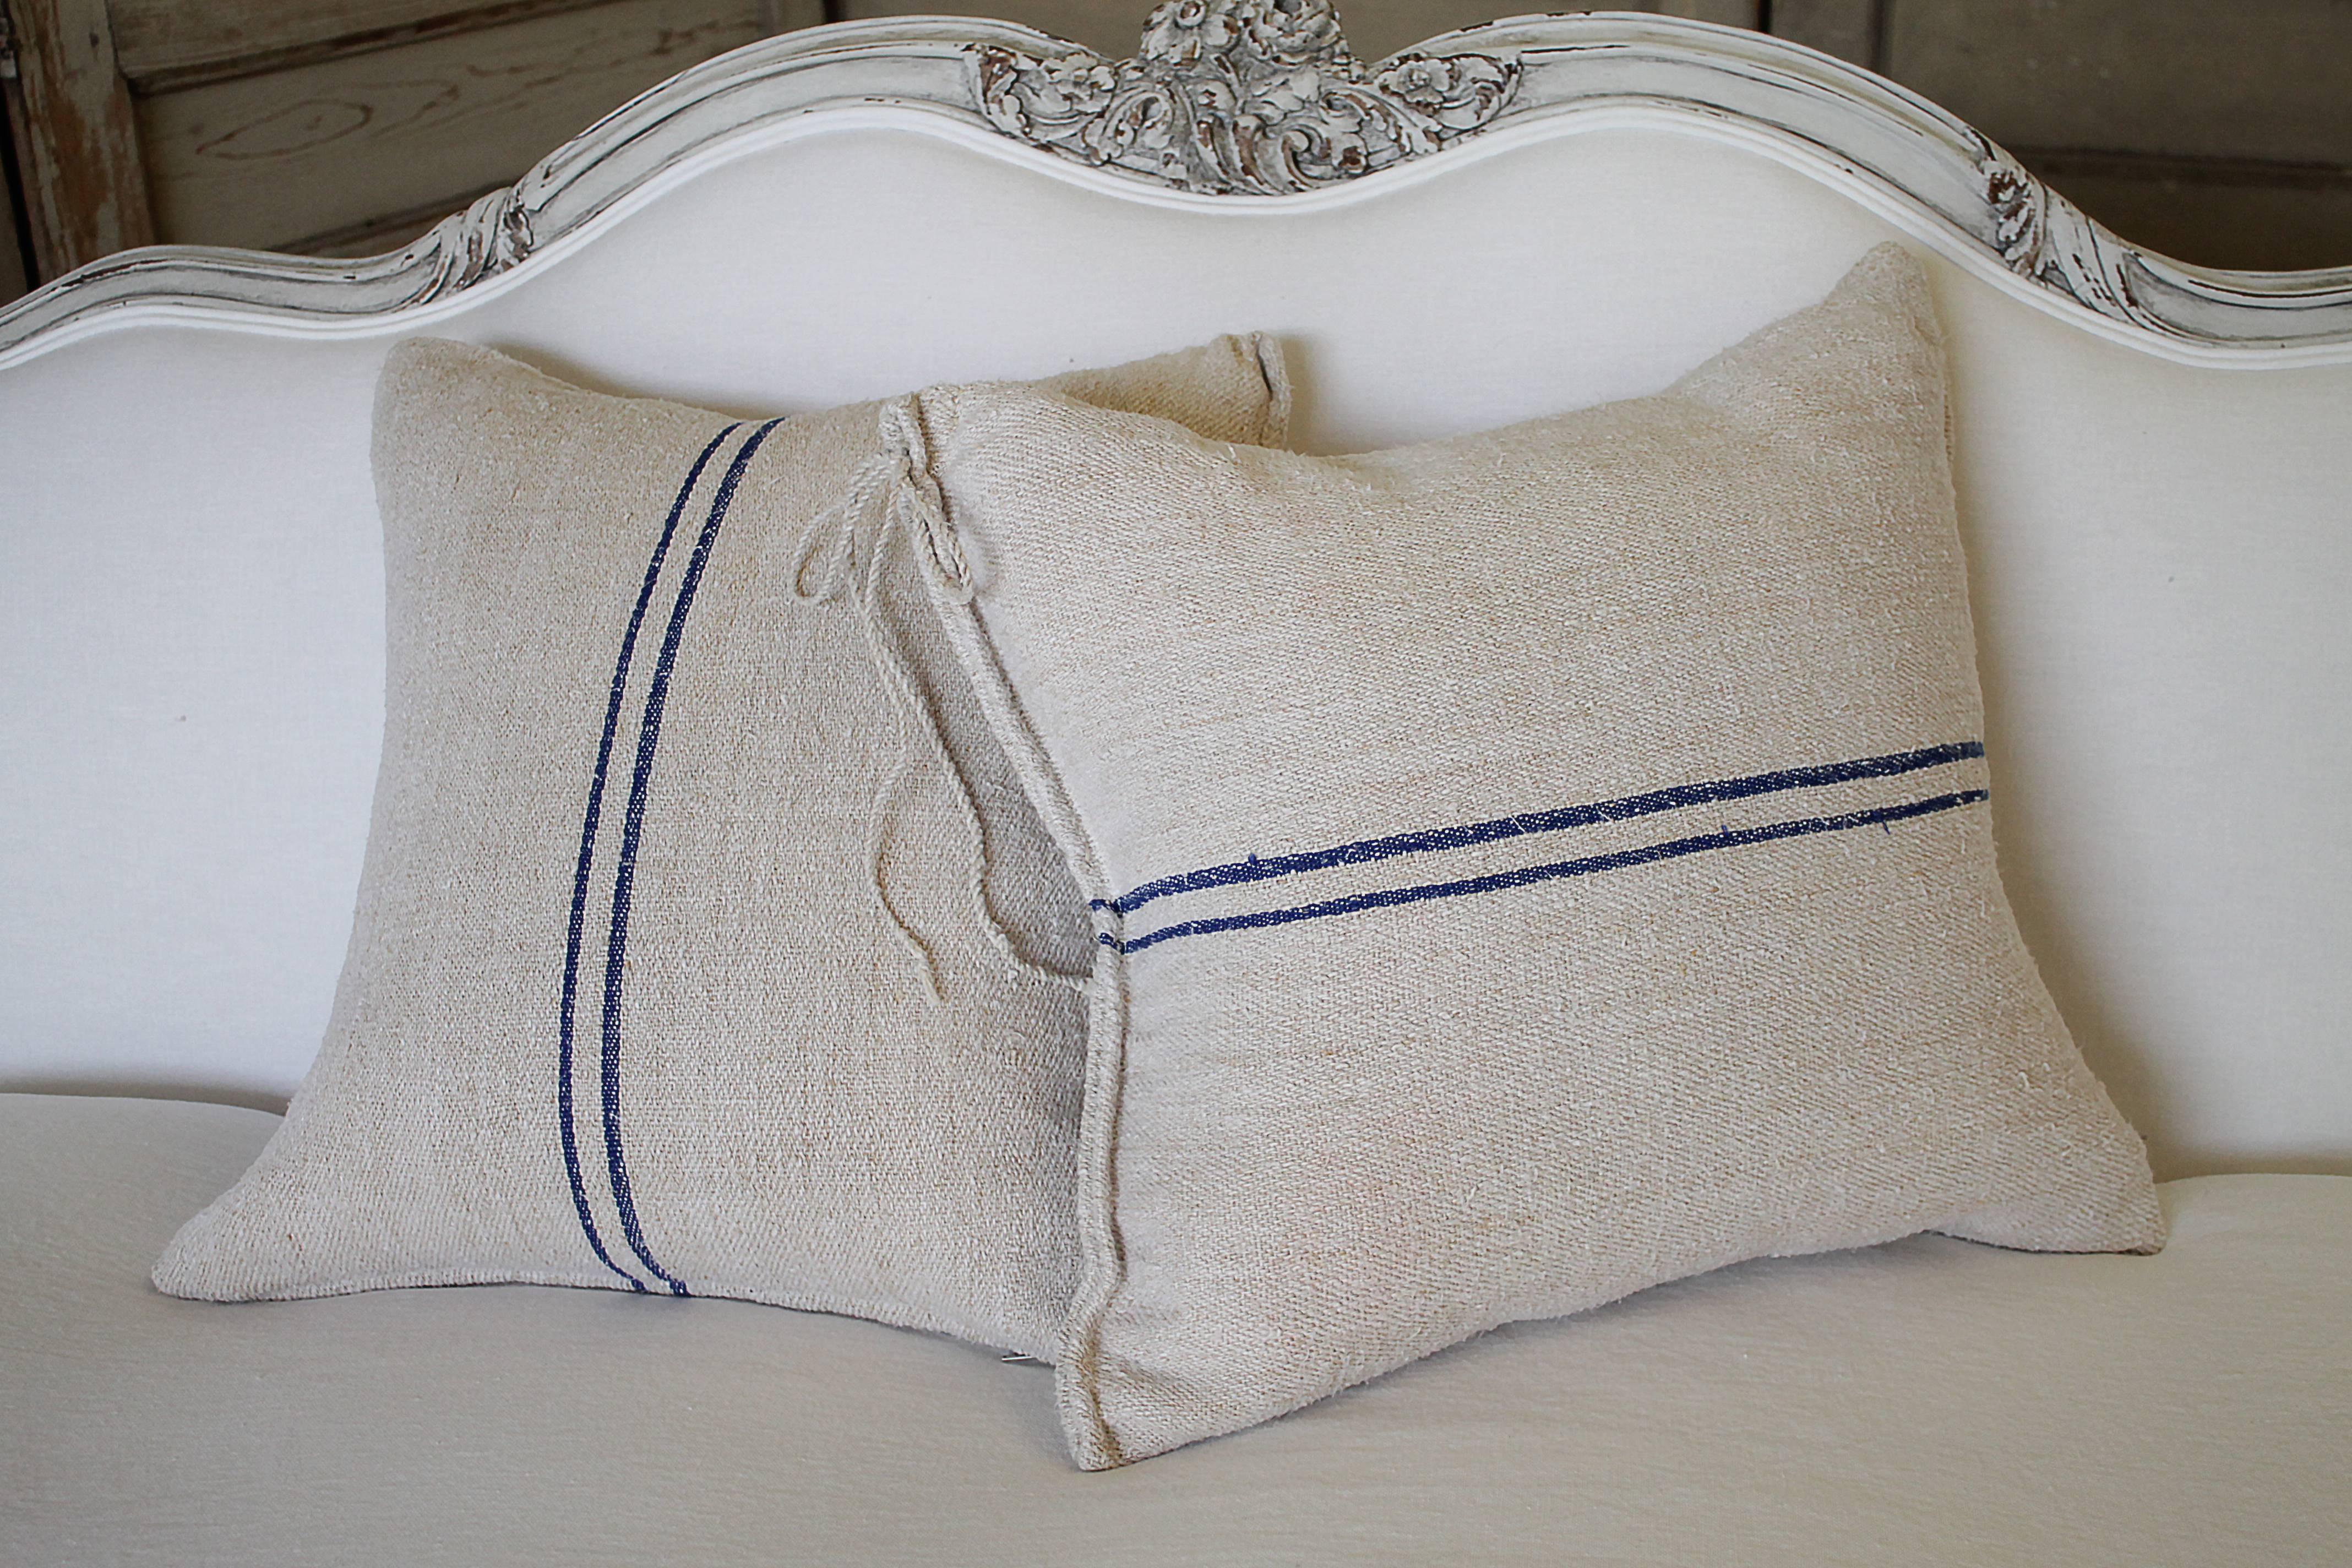 Beautiful set of pillows made from antique farmers grain sack circa 1890-1920.
These are a light oatmeal color with a dark blue double stripe in the center. Each pillow is finished with a zipper closure and overlocked. The original draw string tie